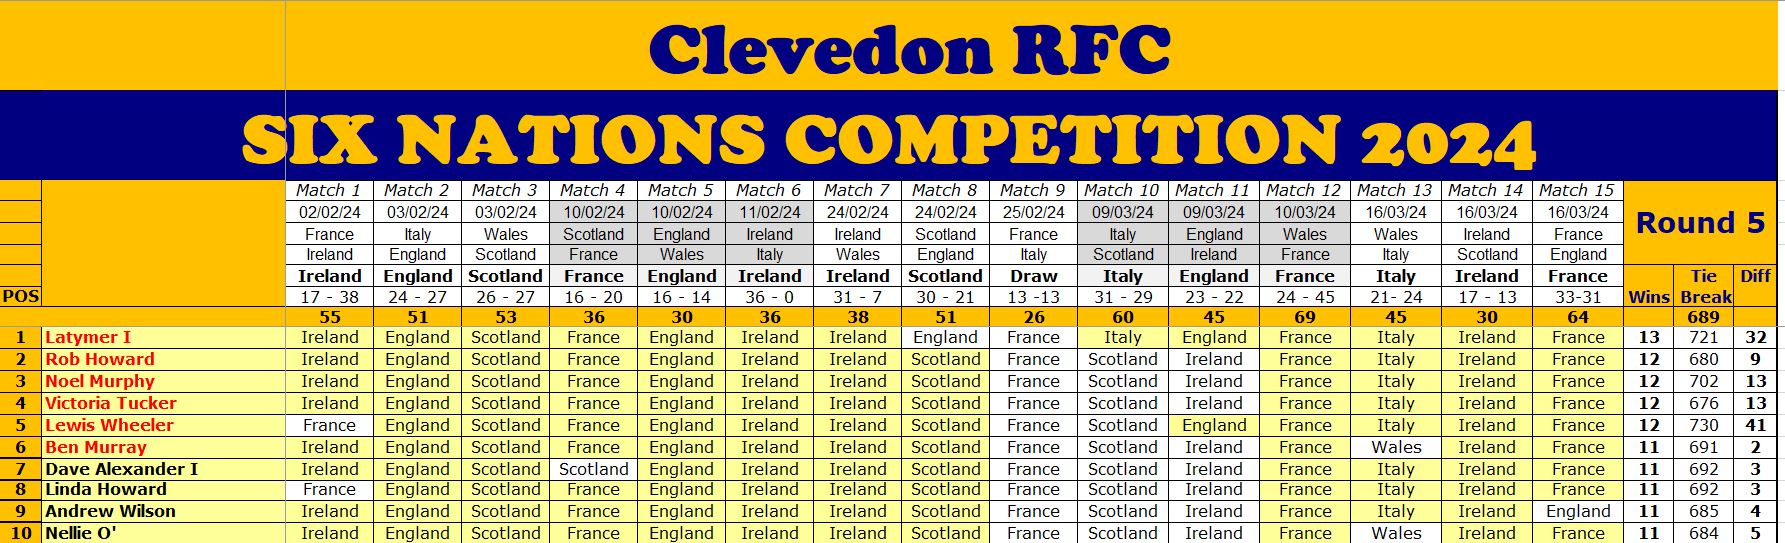 Six Nations 2024 Round 5 results